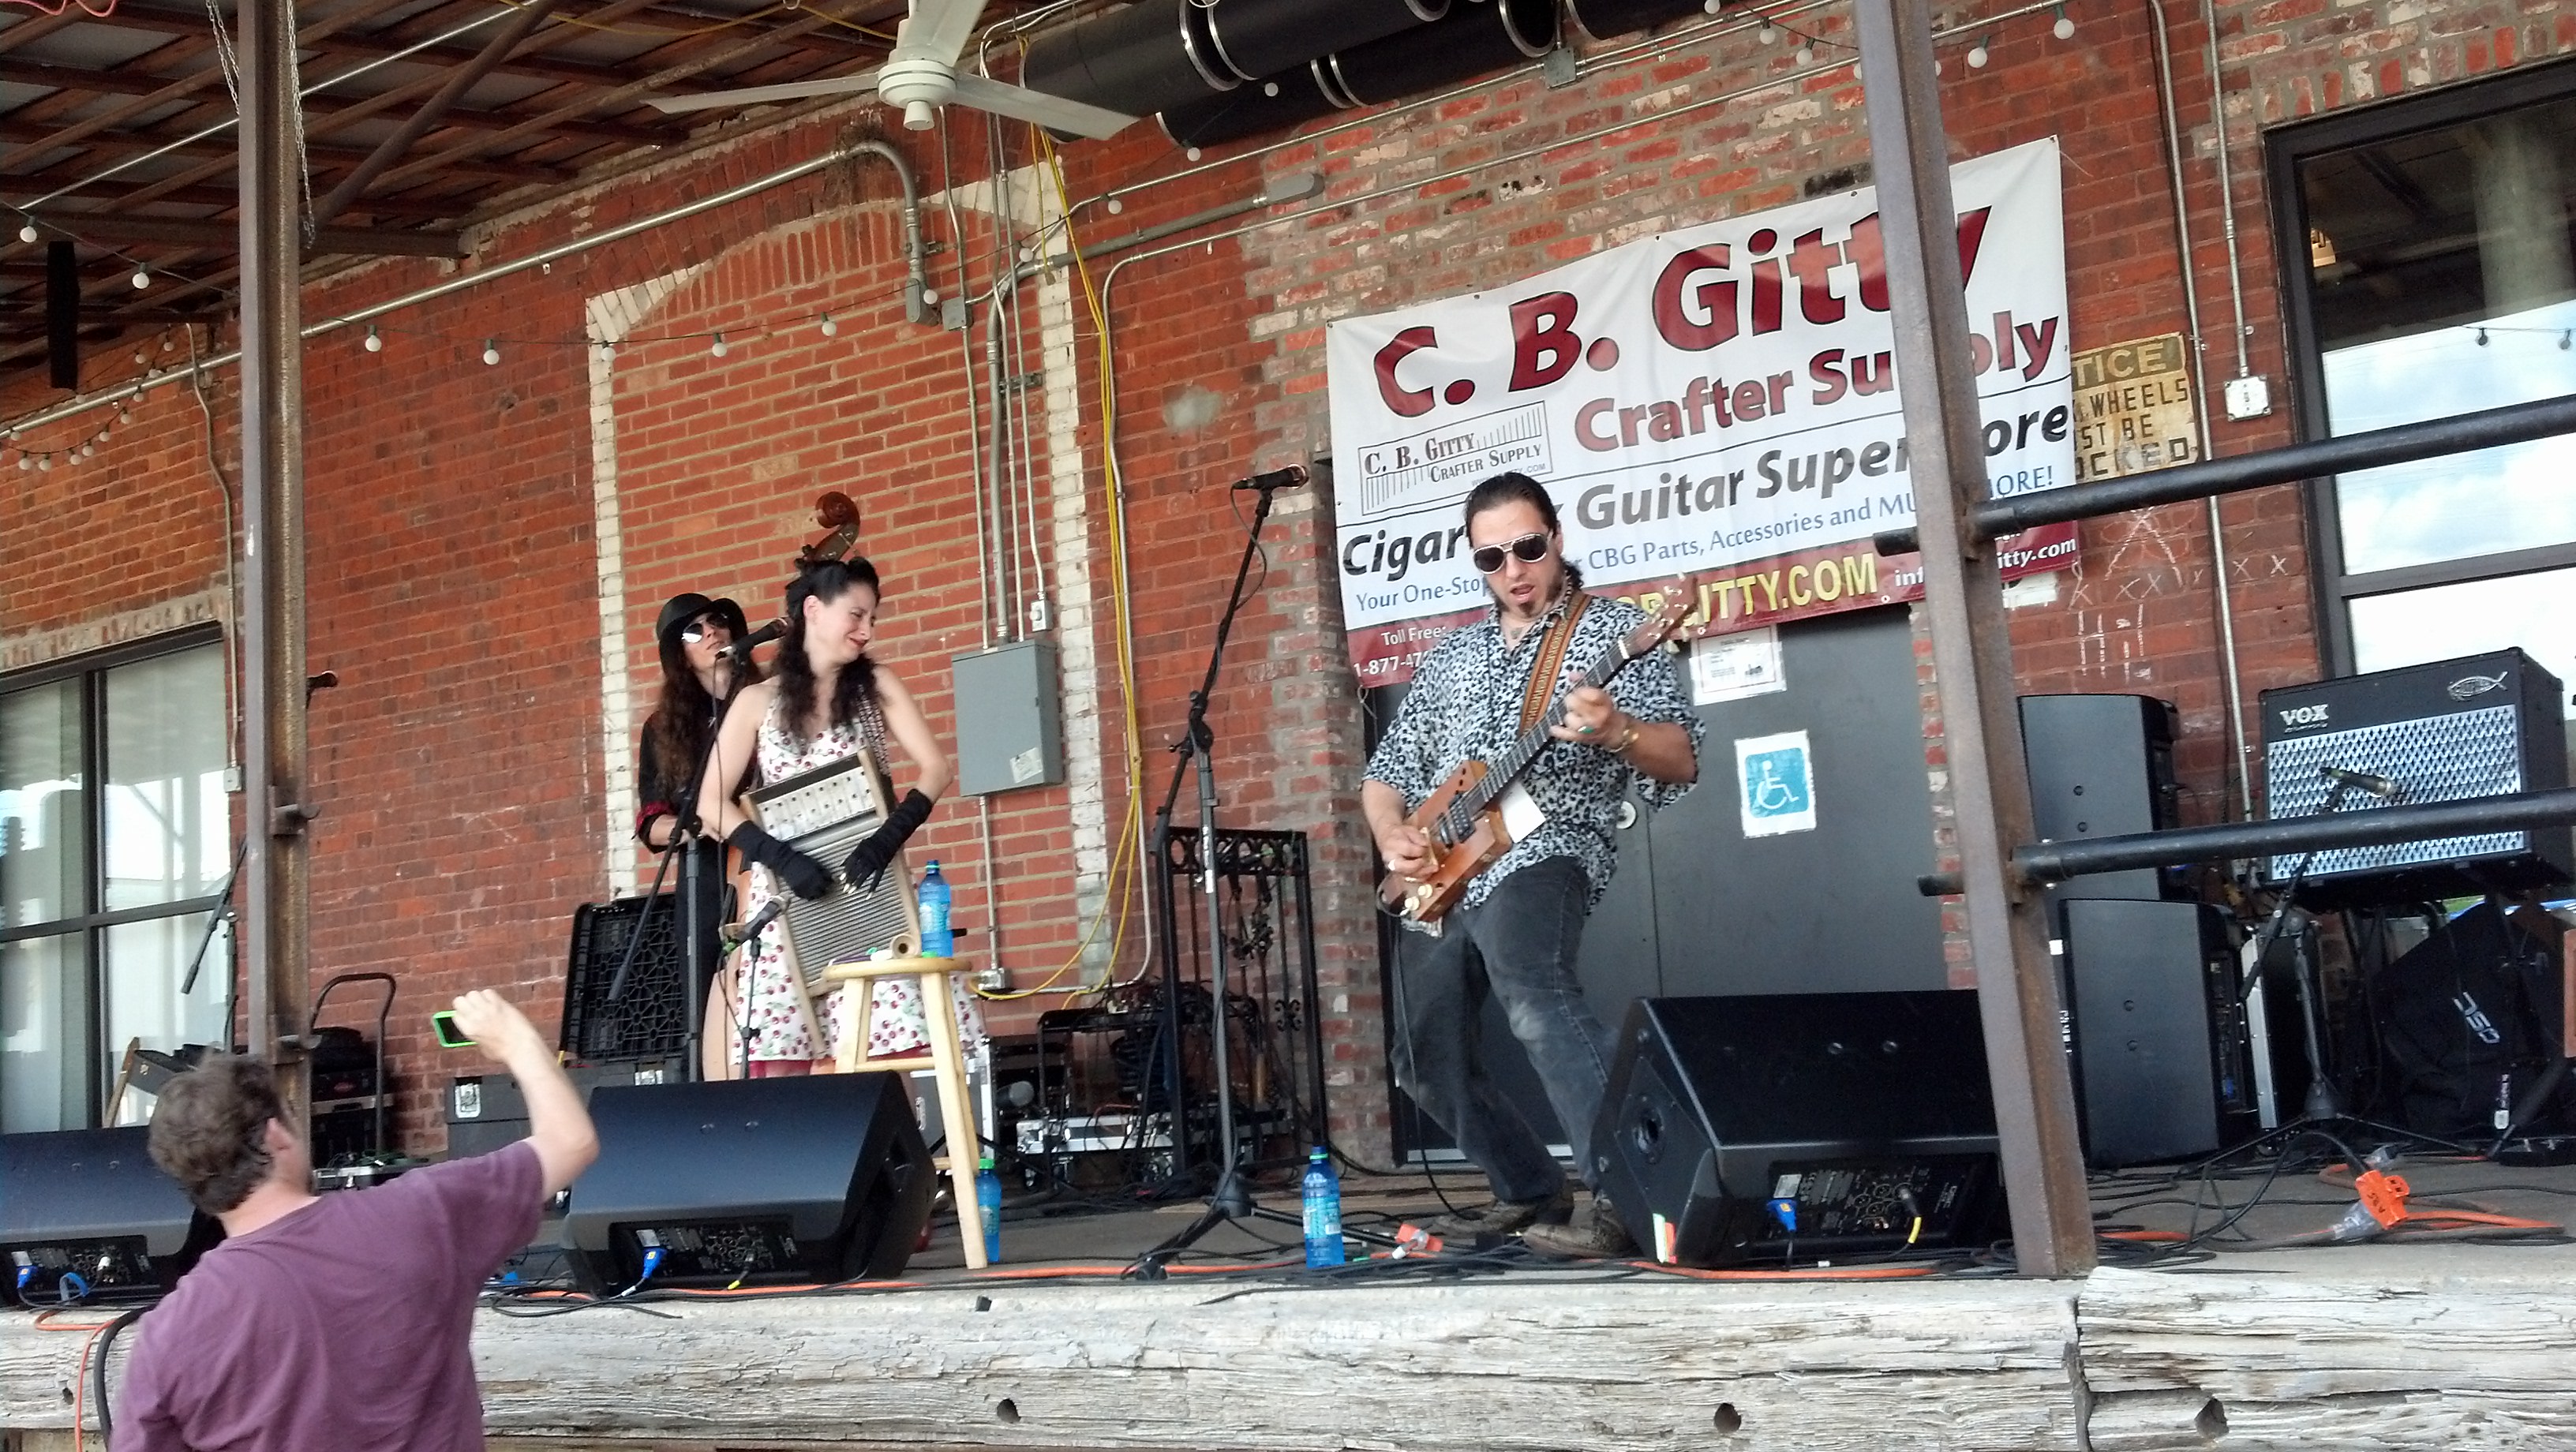 Justin Johnson joins April Mae and the Junebugs as a stand-in upright bassist, while Bill Jehle, of "One Man's Trash" and Cigar Box Guitar Museum fame, tries his hand at photography, lower left.